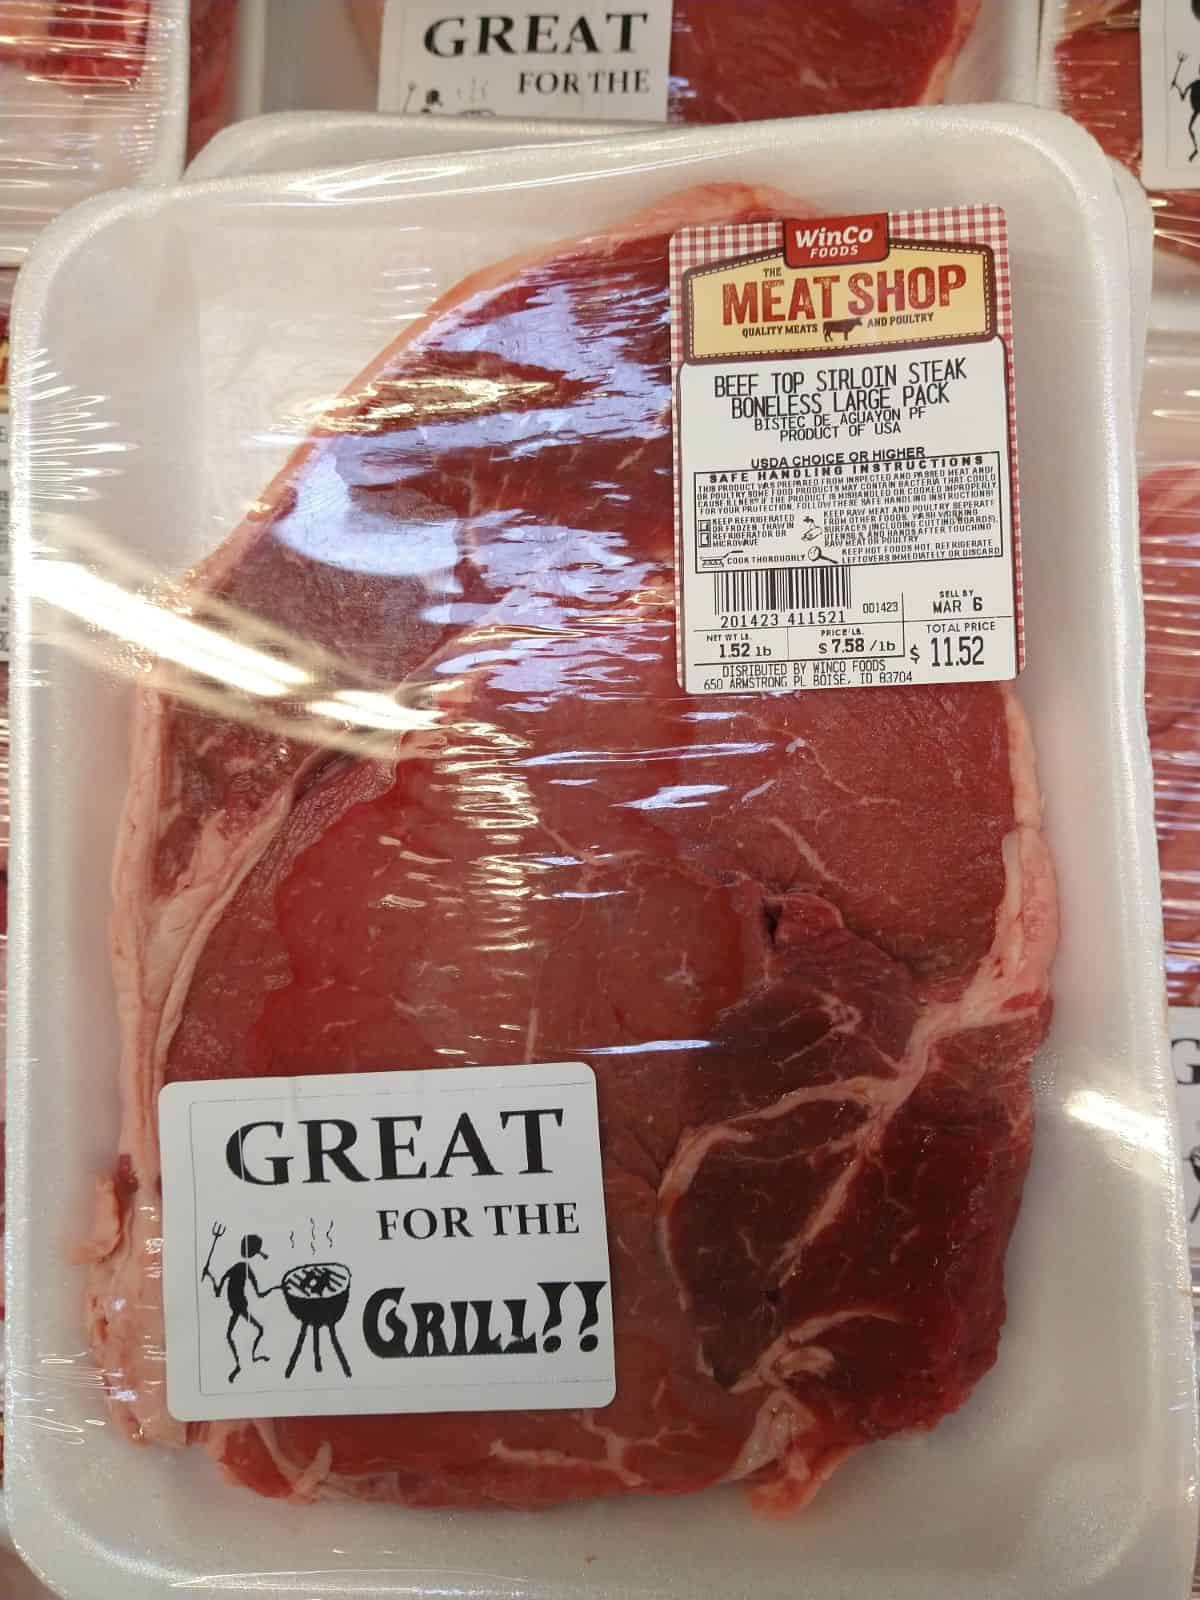 Packages of Top Sirloin steak at a Winco grocery store. The steaks are $7.58/lb